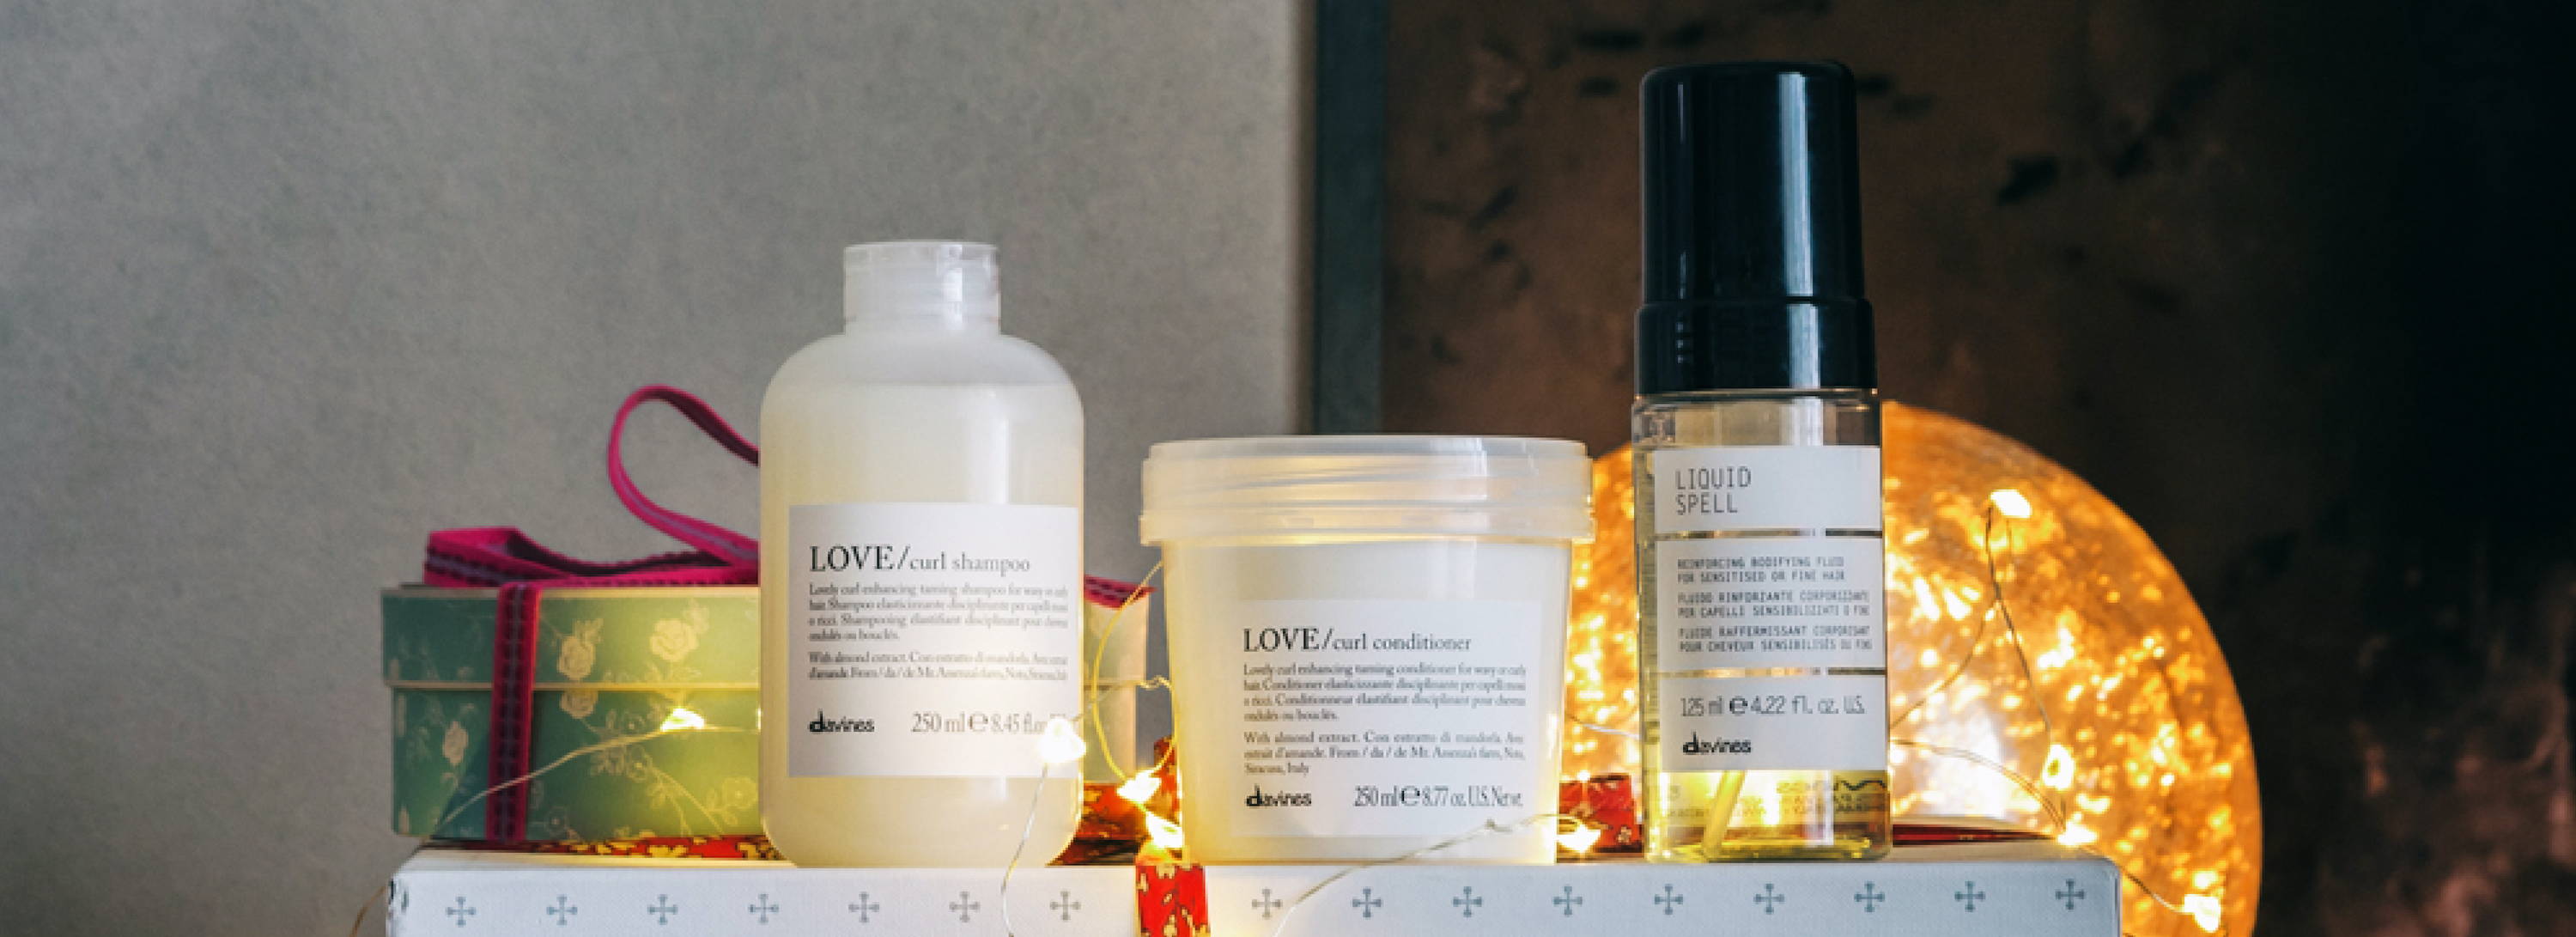 OI Travel bundle Davines holiday gift guide